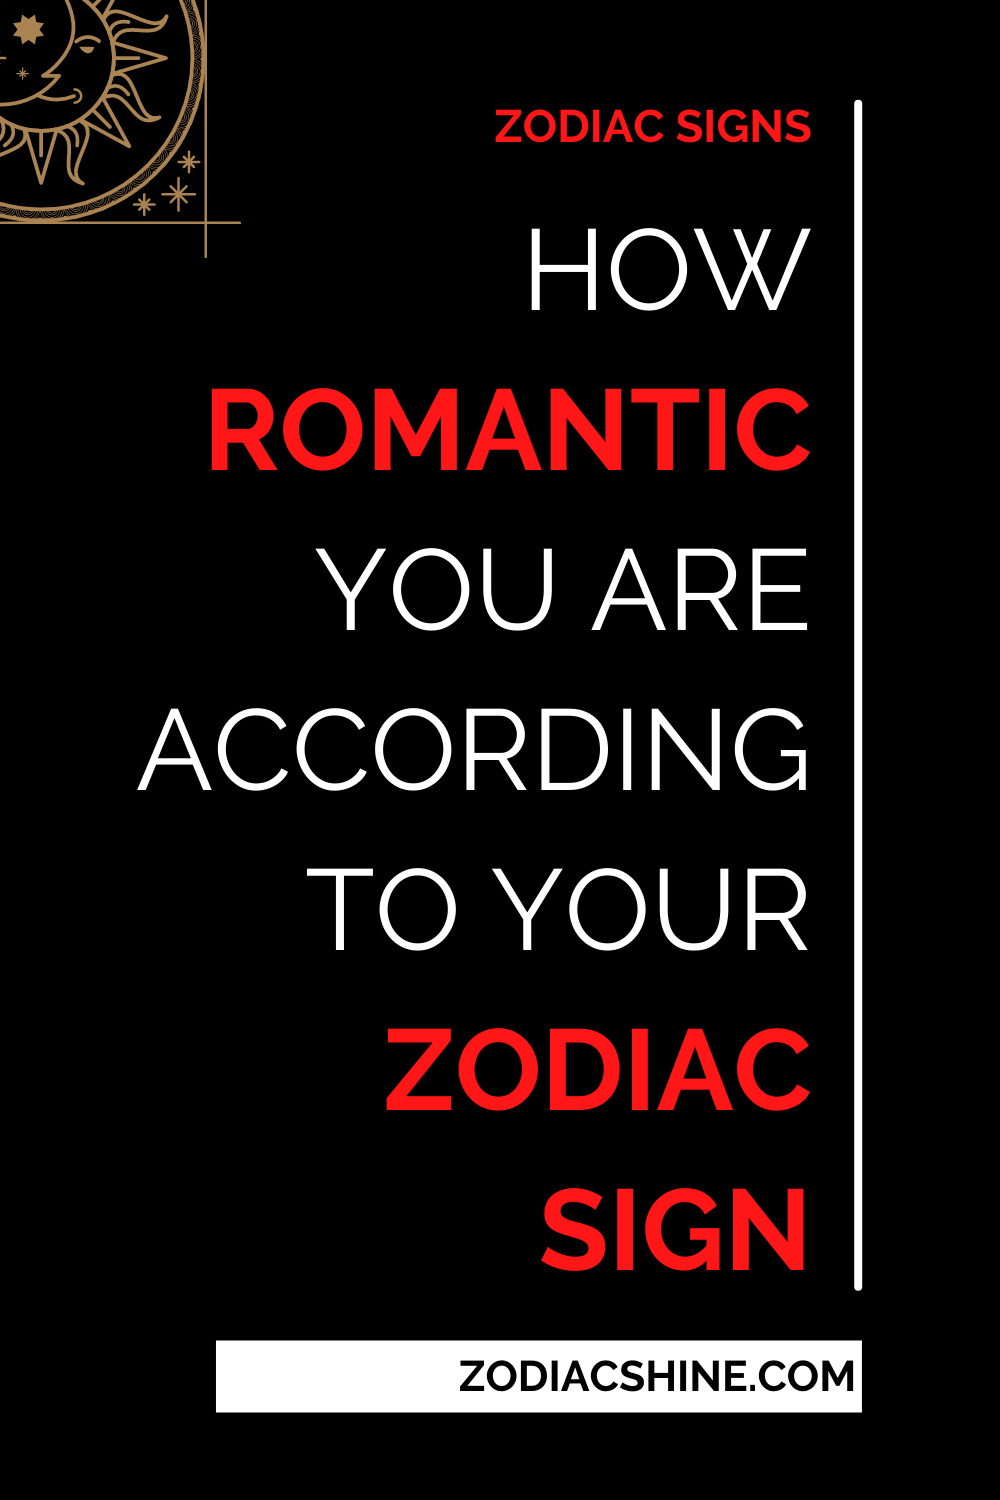 How Romantic You Are According To Your Zodiac Sign